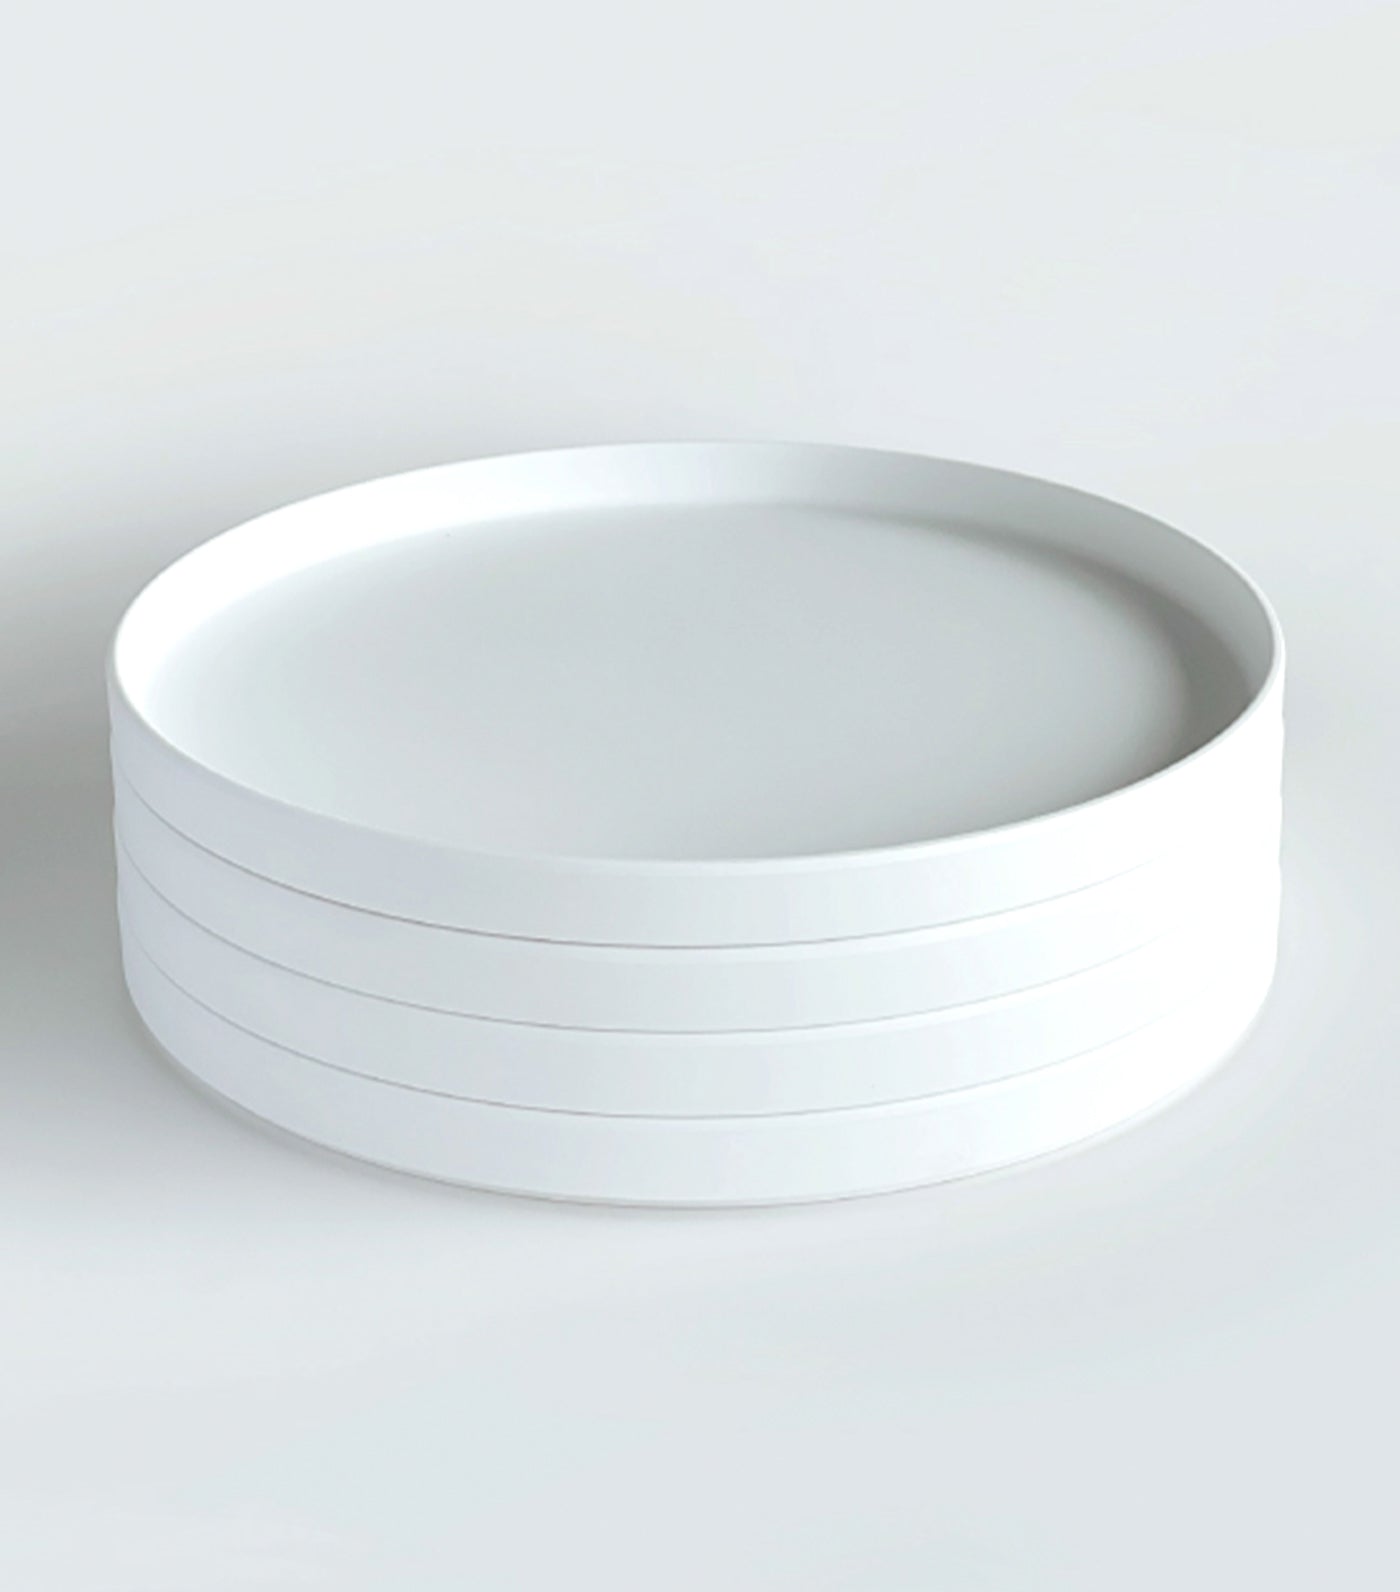 Simpli by Clever Spaces Dinnerware Collection